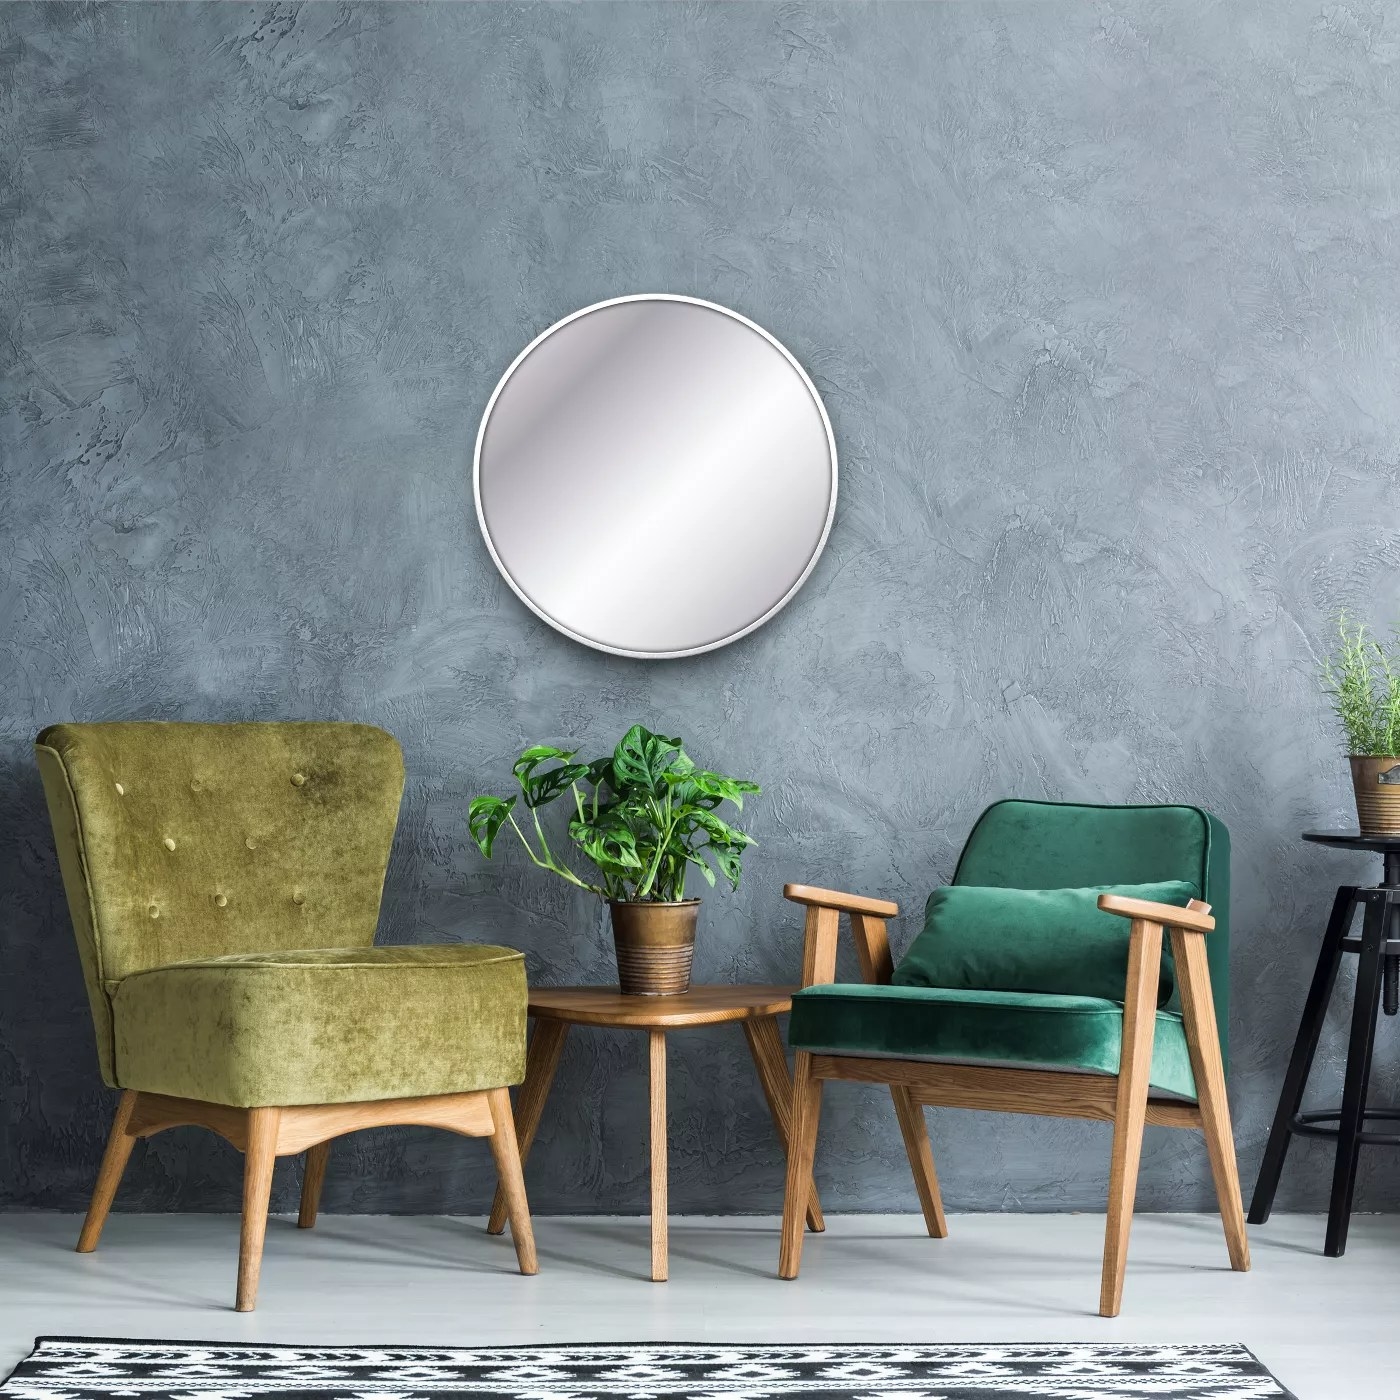 The round mirror with a metal frame hanging on a wall in a living room